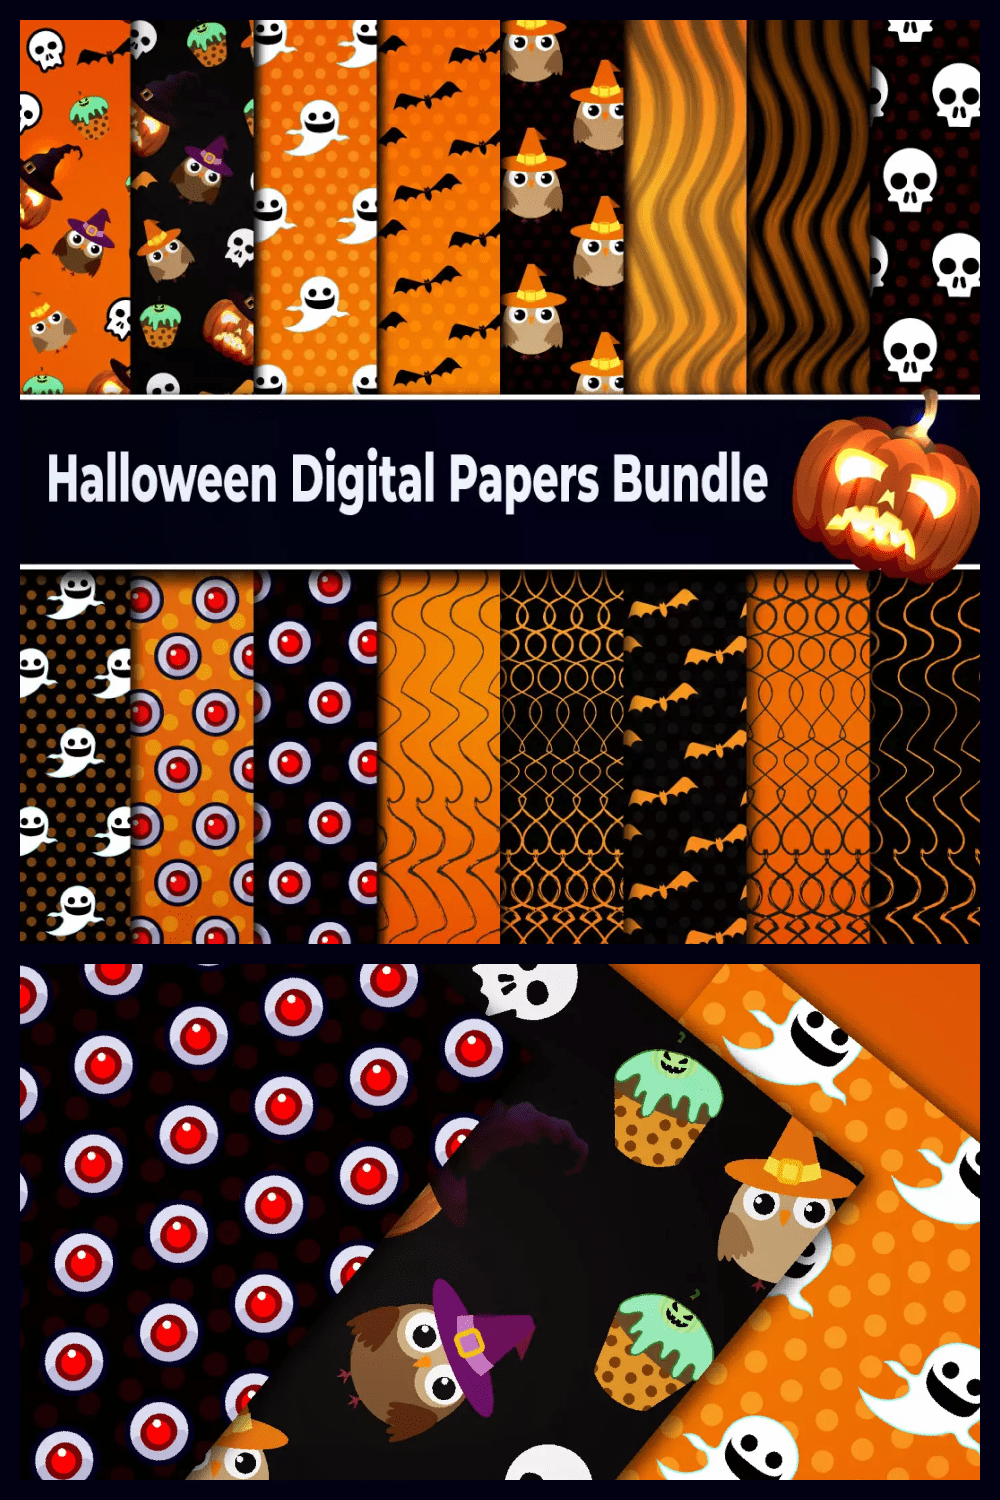 Halloween wrapping paper in black and orange.